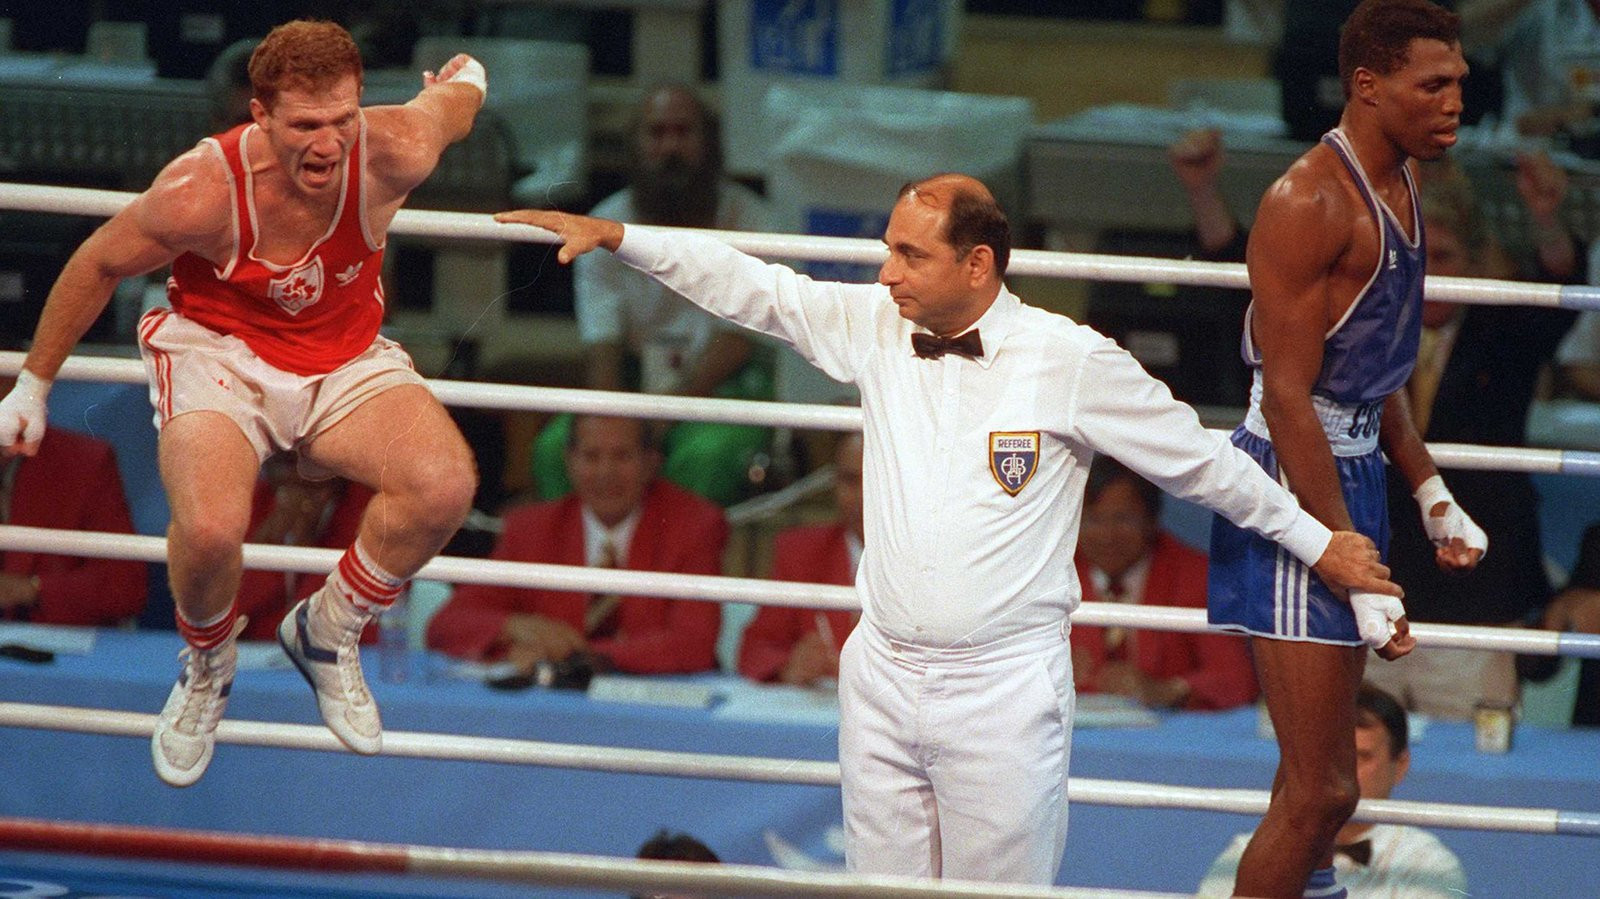 Boxing is Ireland's most successful Olympic sport with a total of 16 medals, including gold for Michael Carruth at Barcelona 1992, one more than all other sports combined ©Getty Images